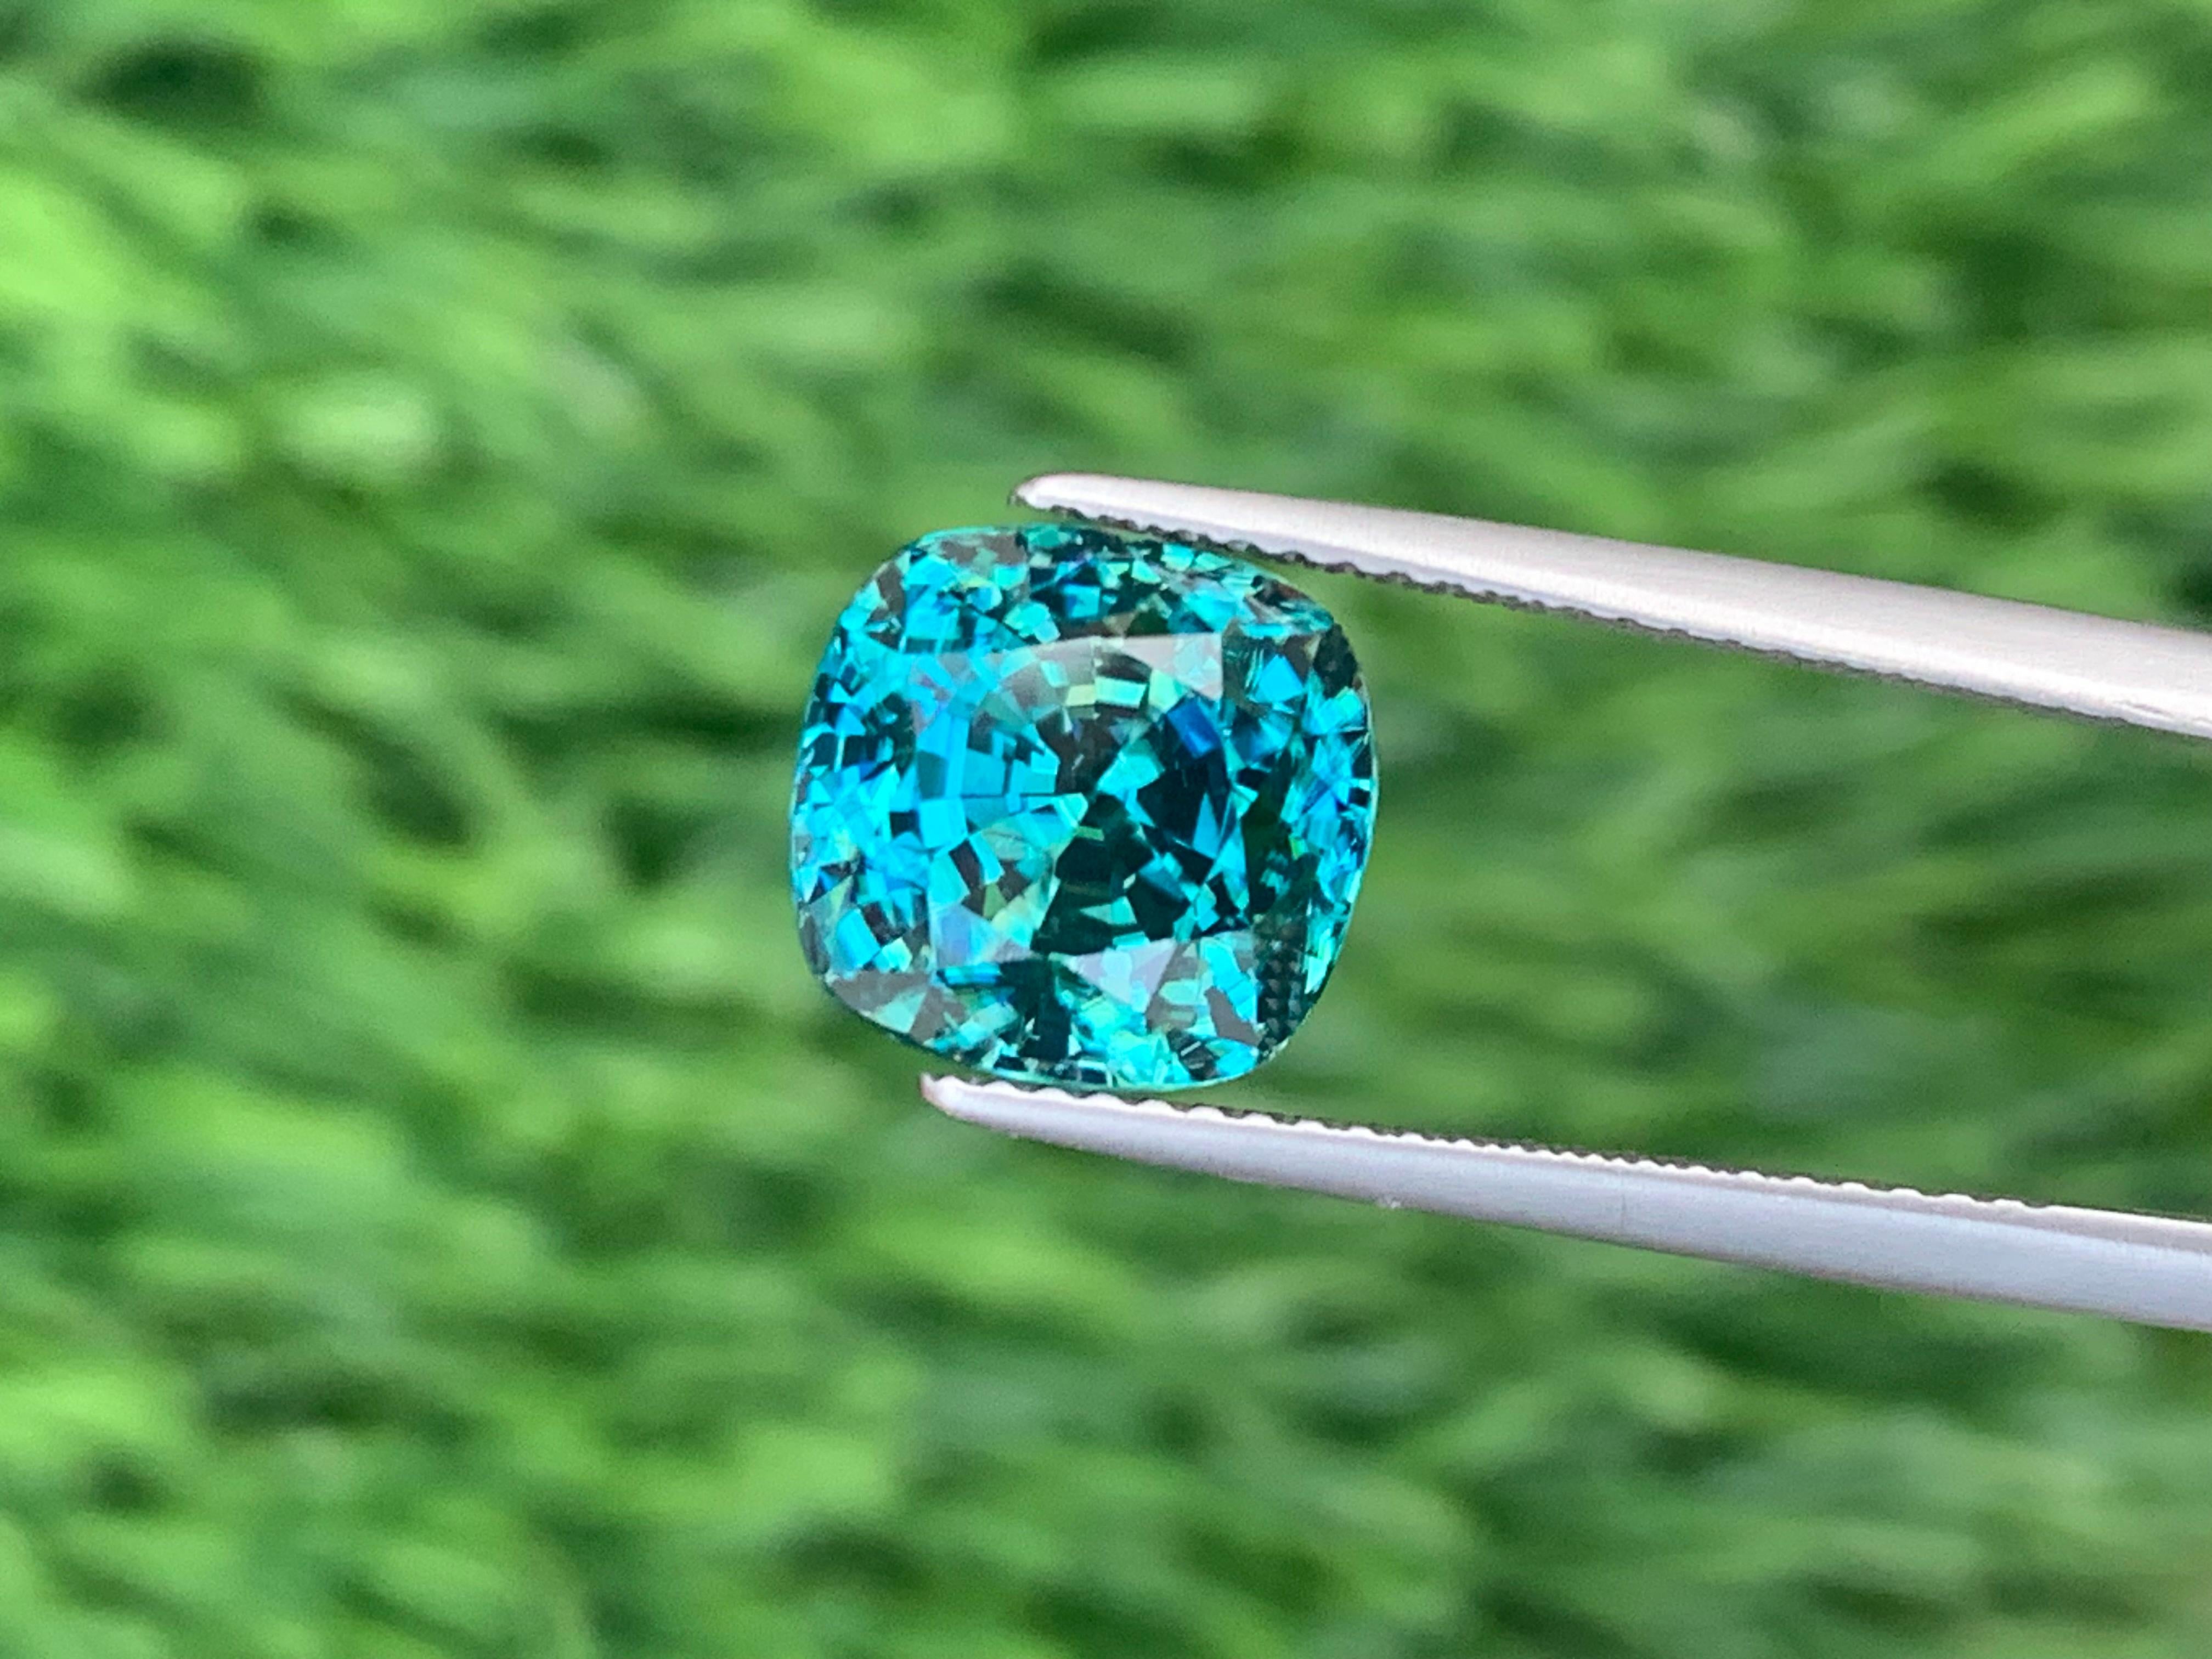 8.55 Carat Majestic Natural Loose Blue Zircon From Cambodia For Jewelry Making For Sale 2